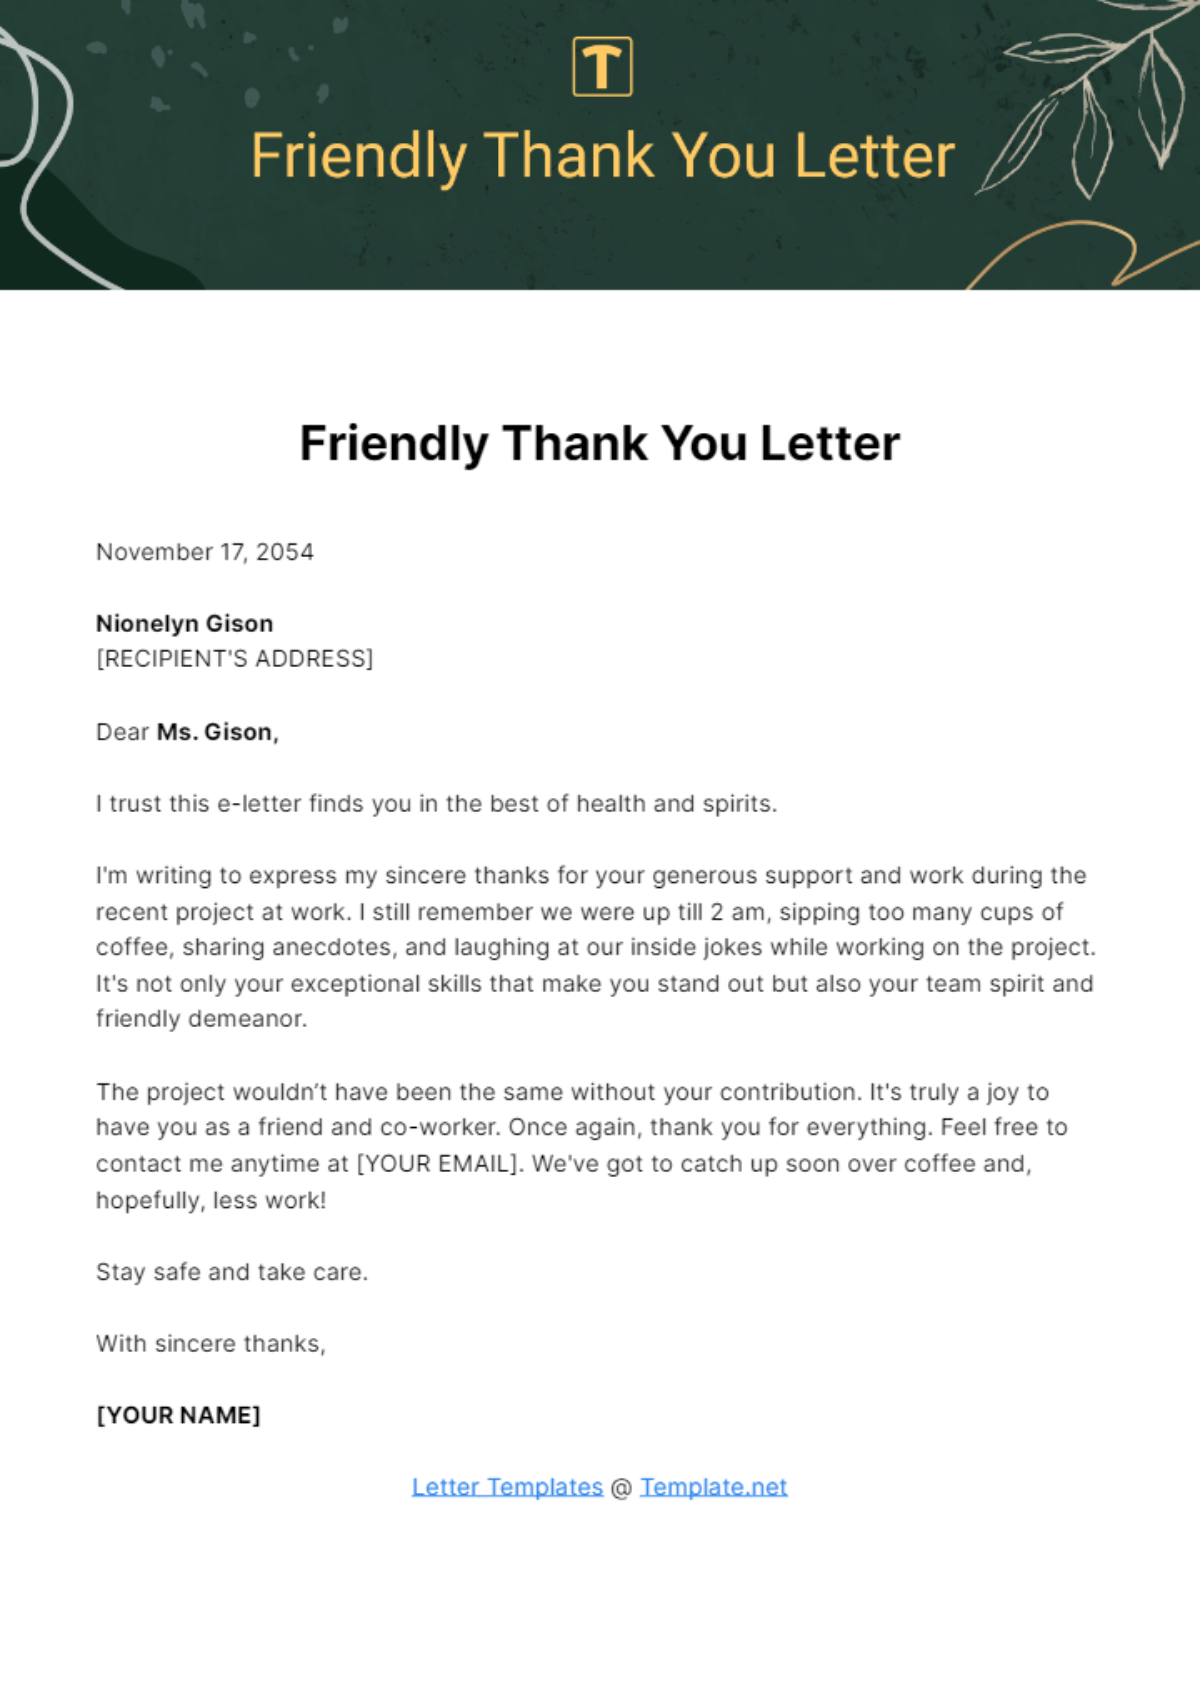 Free Friendly Thank You Letter Template